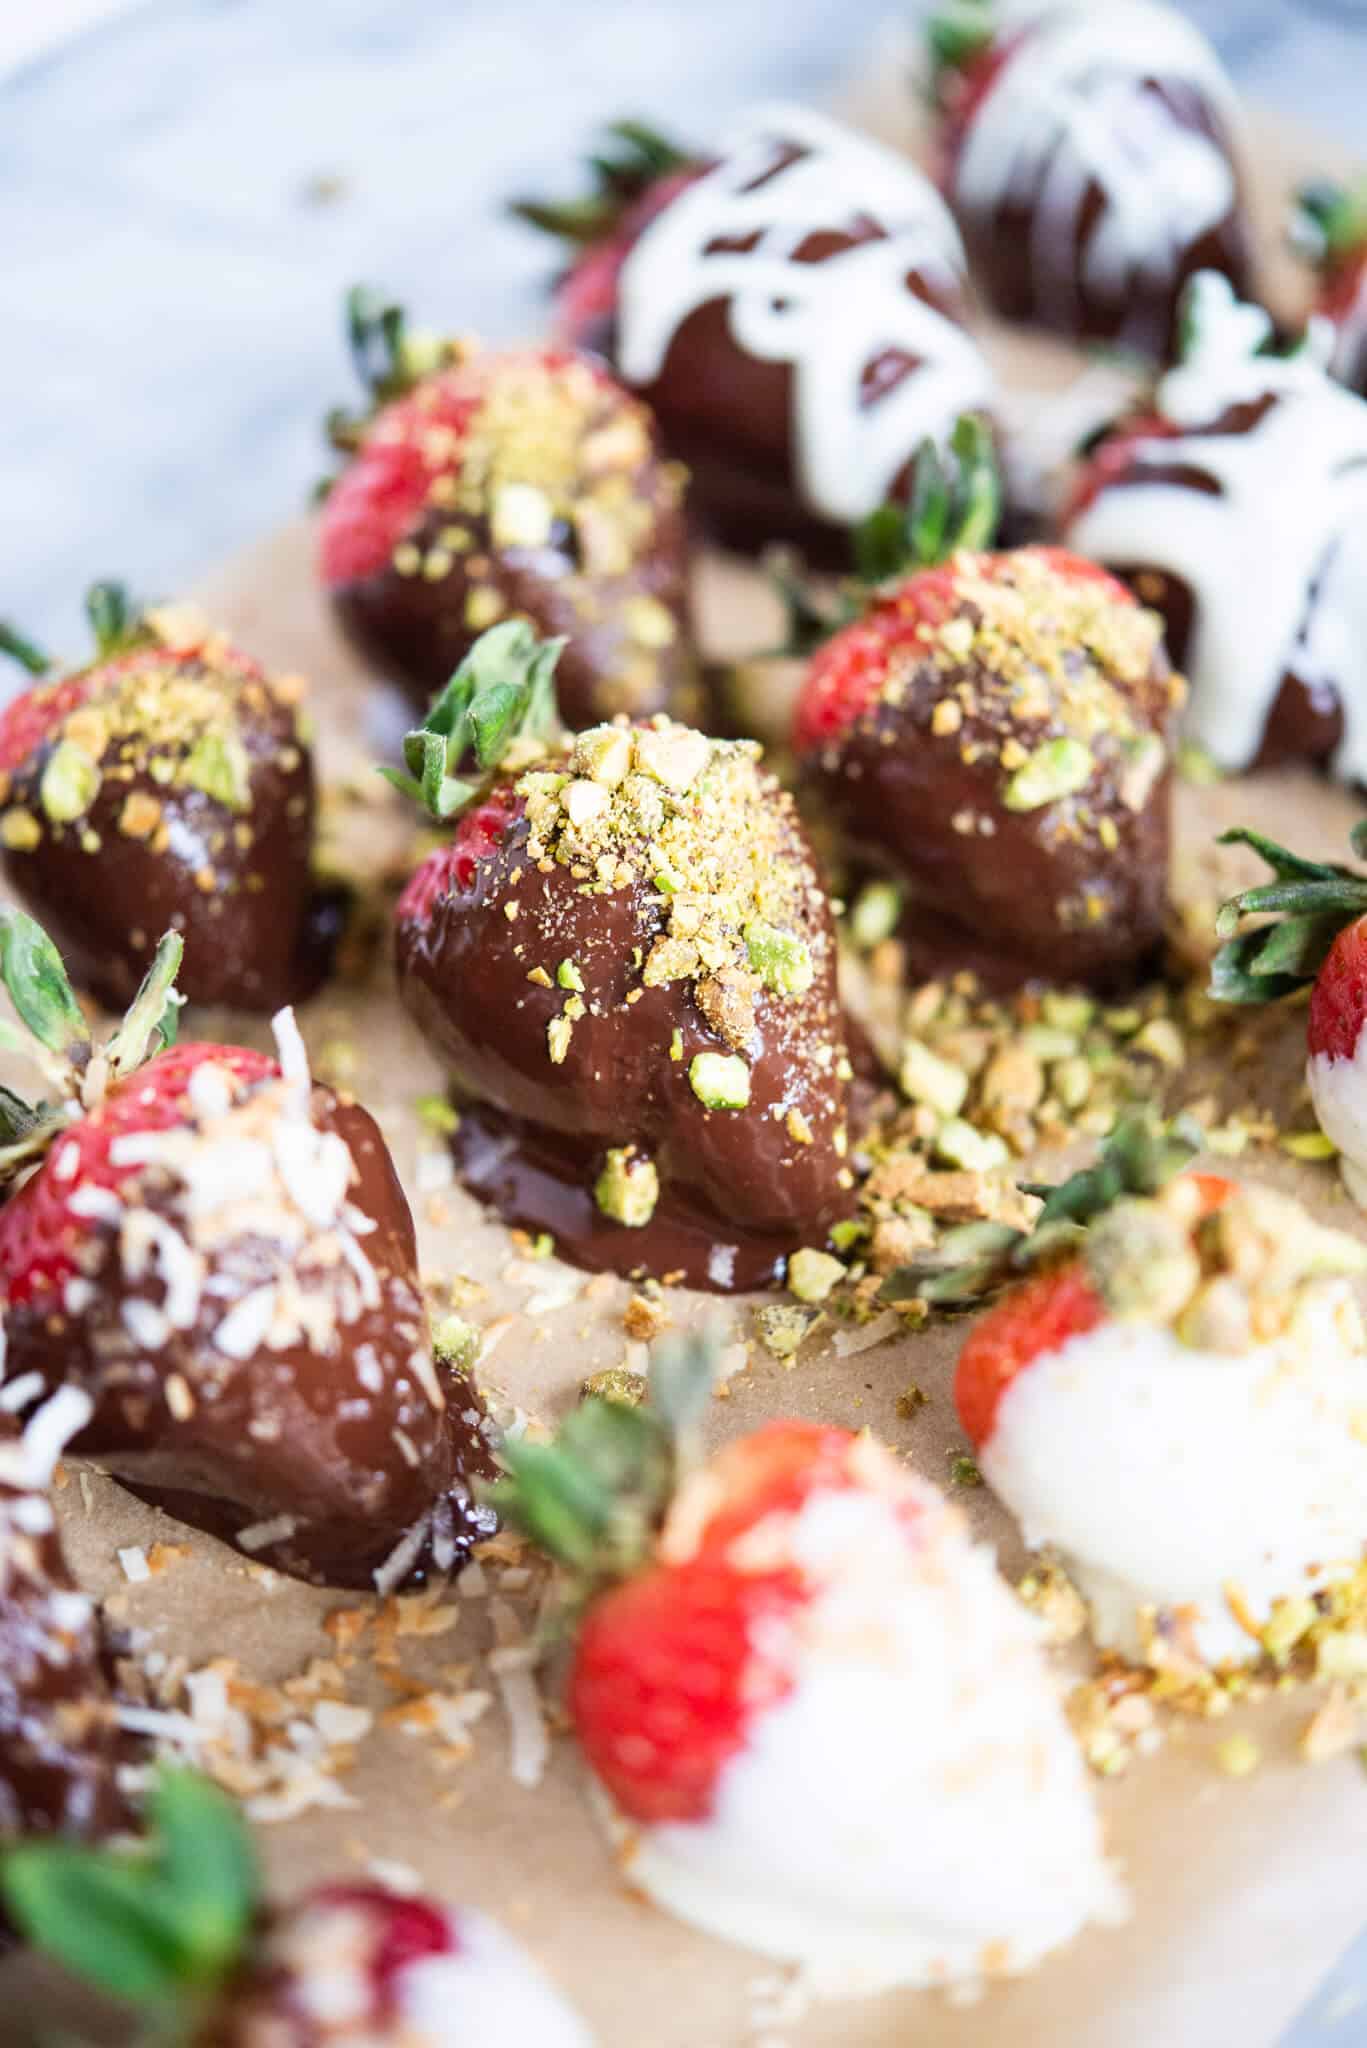 how to make chocolate covered strawberries - chocolate covered strawberries on parchment paper on a marble surface